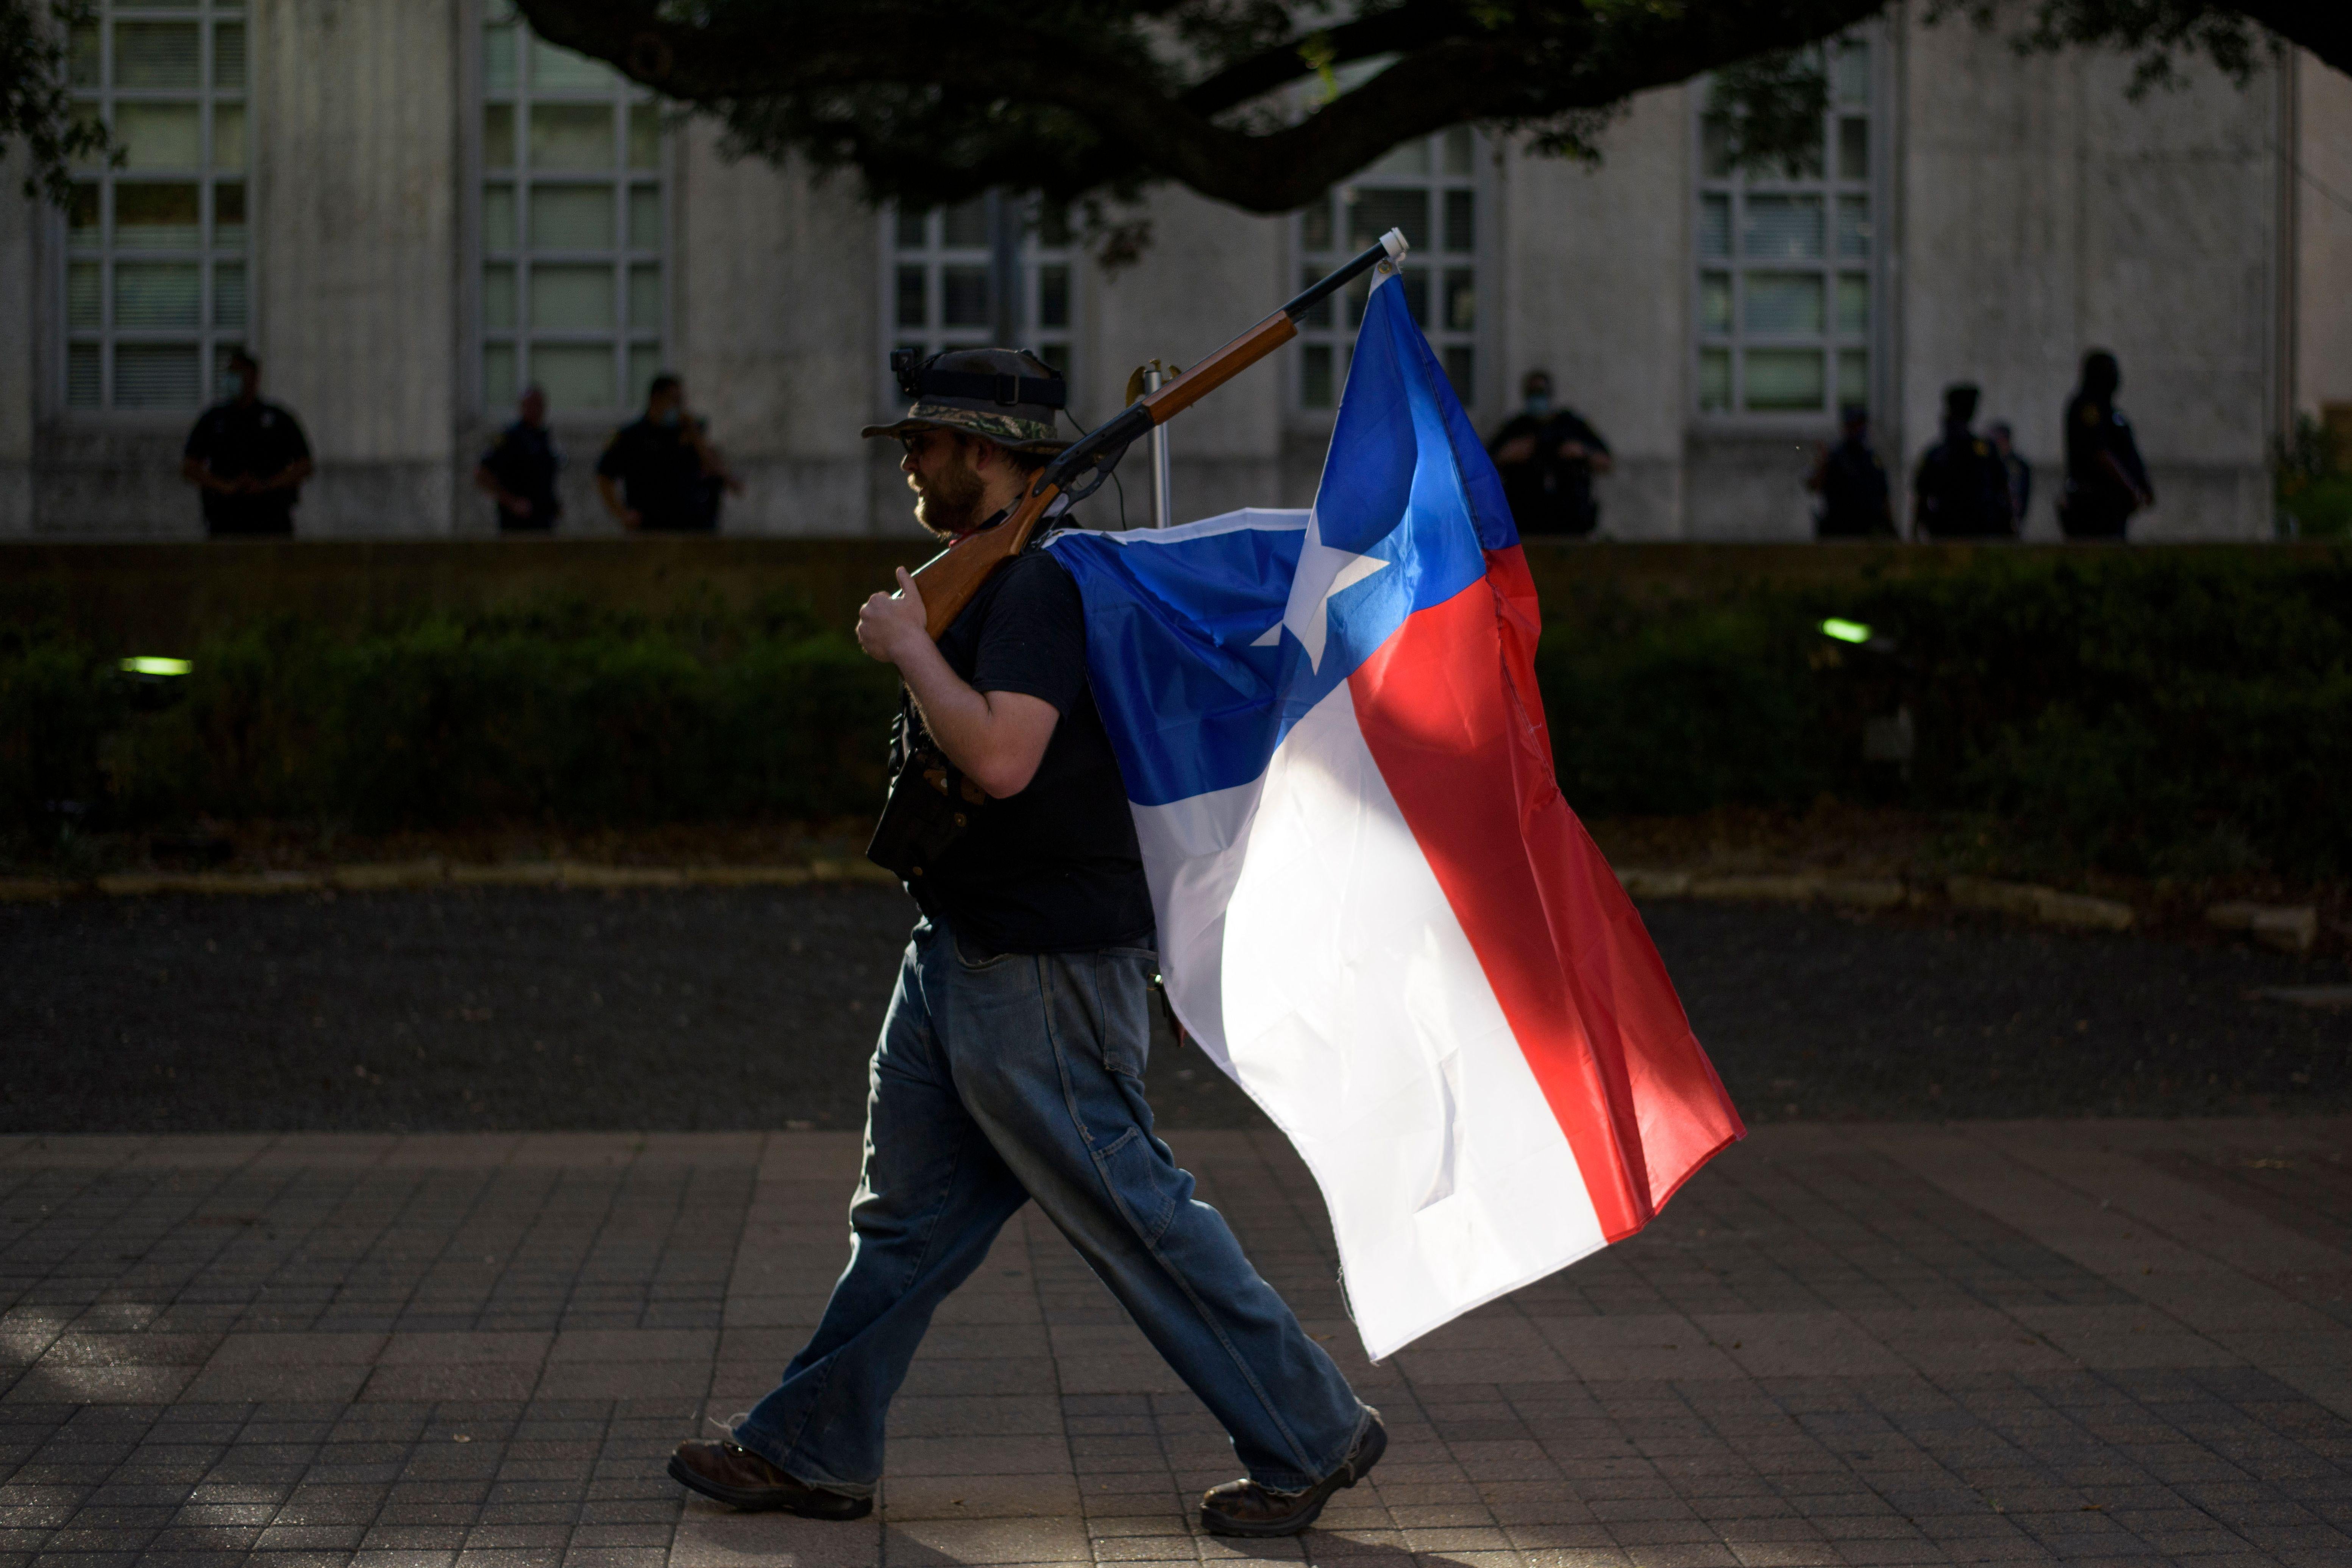 A man walks with a rifle with a Texas flag attached to it during a Police Appreciation rally at the City Hall in Houston.